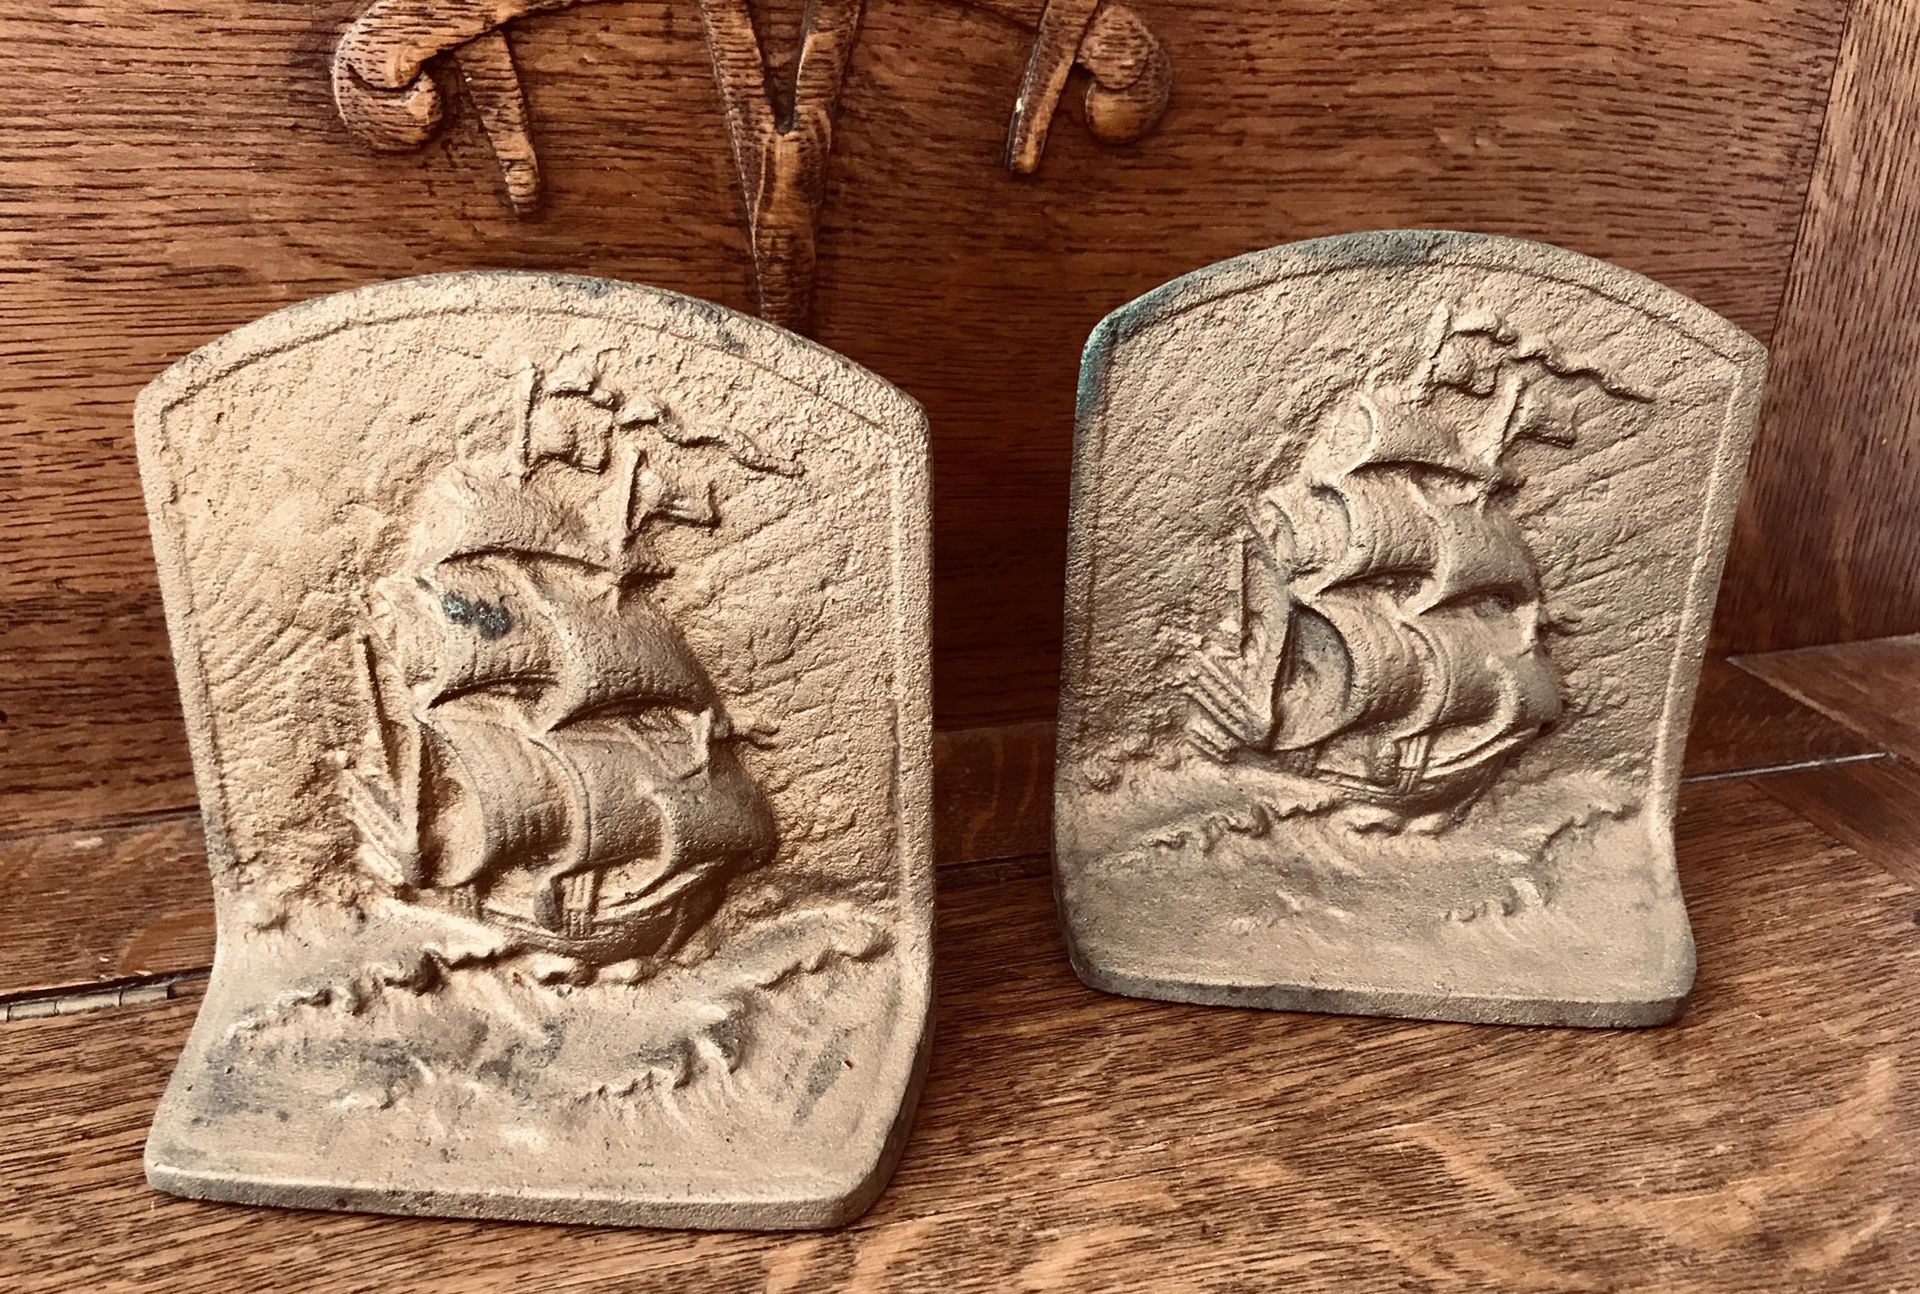 VINTAGE Heavy BRONZE With Goldtone Finish - Sailing Ship Bookends